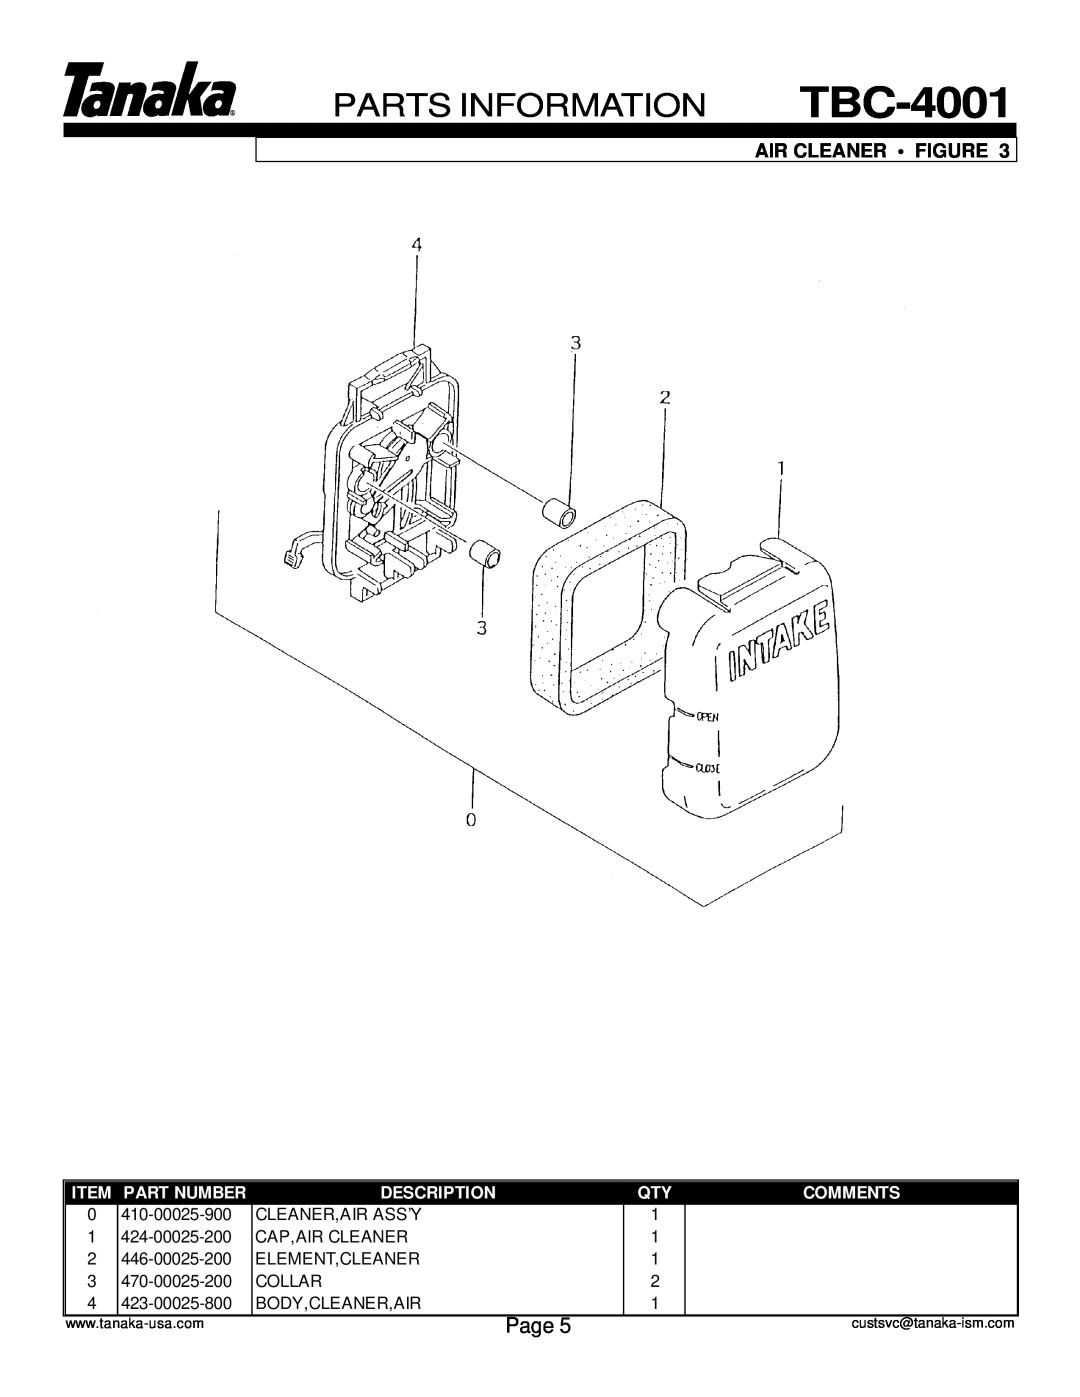 Tanaka TBC-4001 manual Parts Information, Page, Air Cleaner Figure, Part Number, Description, Comments 